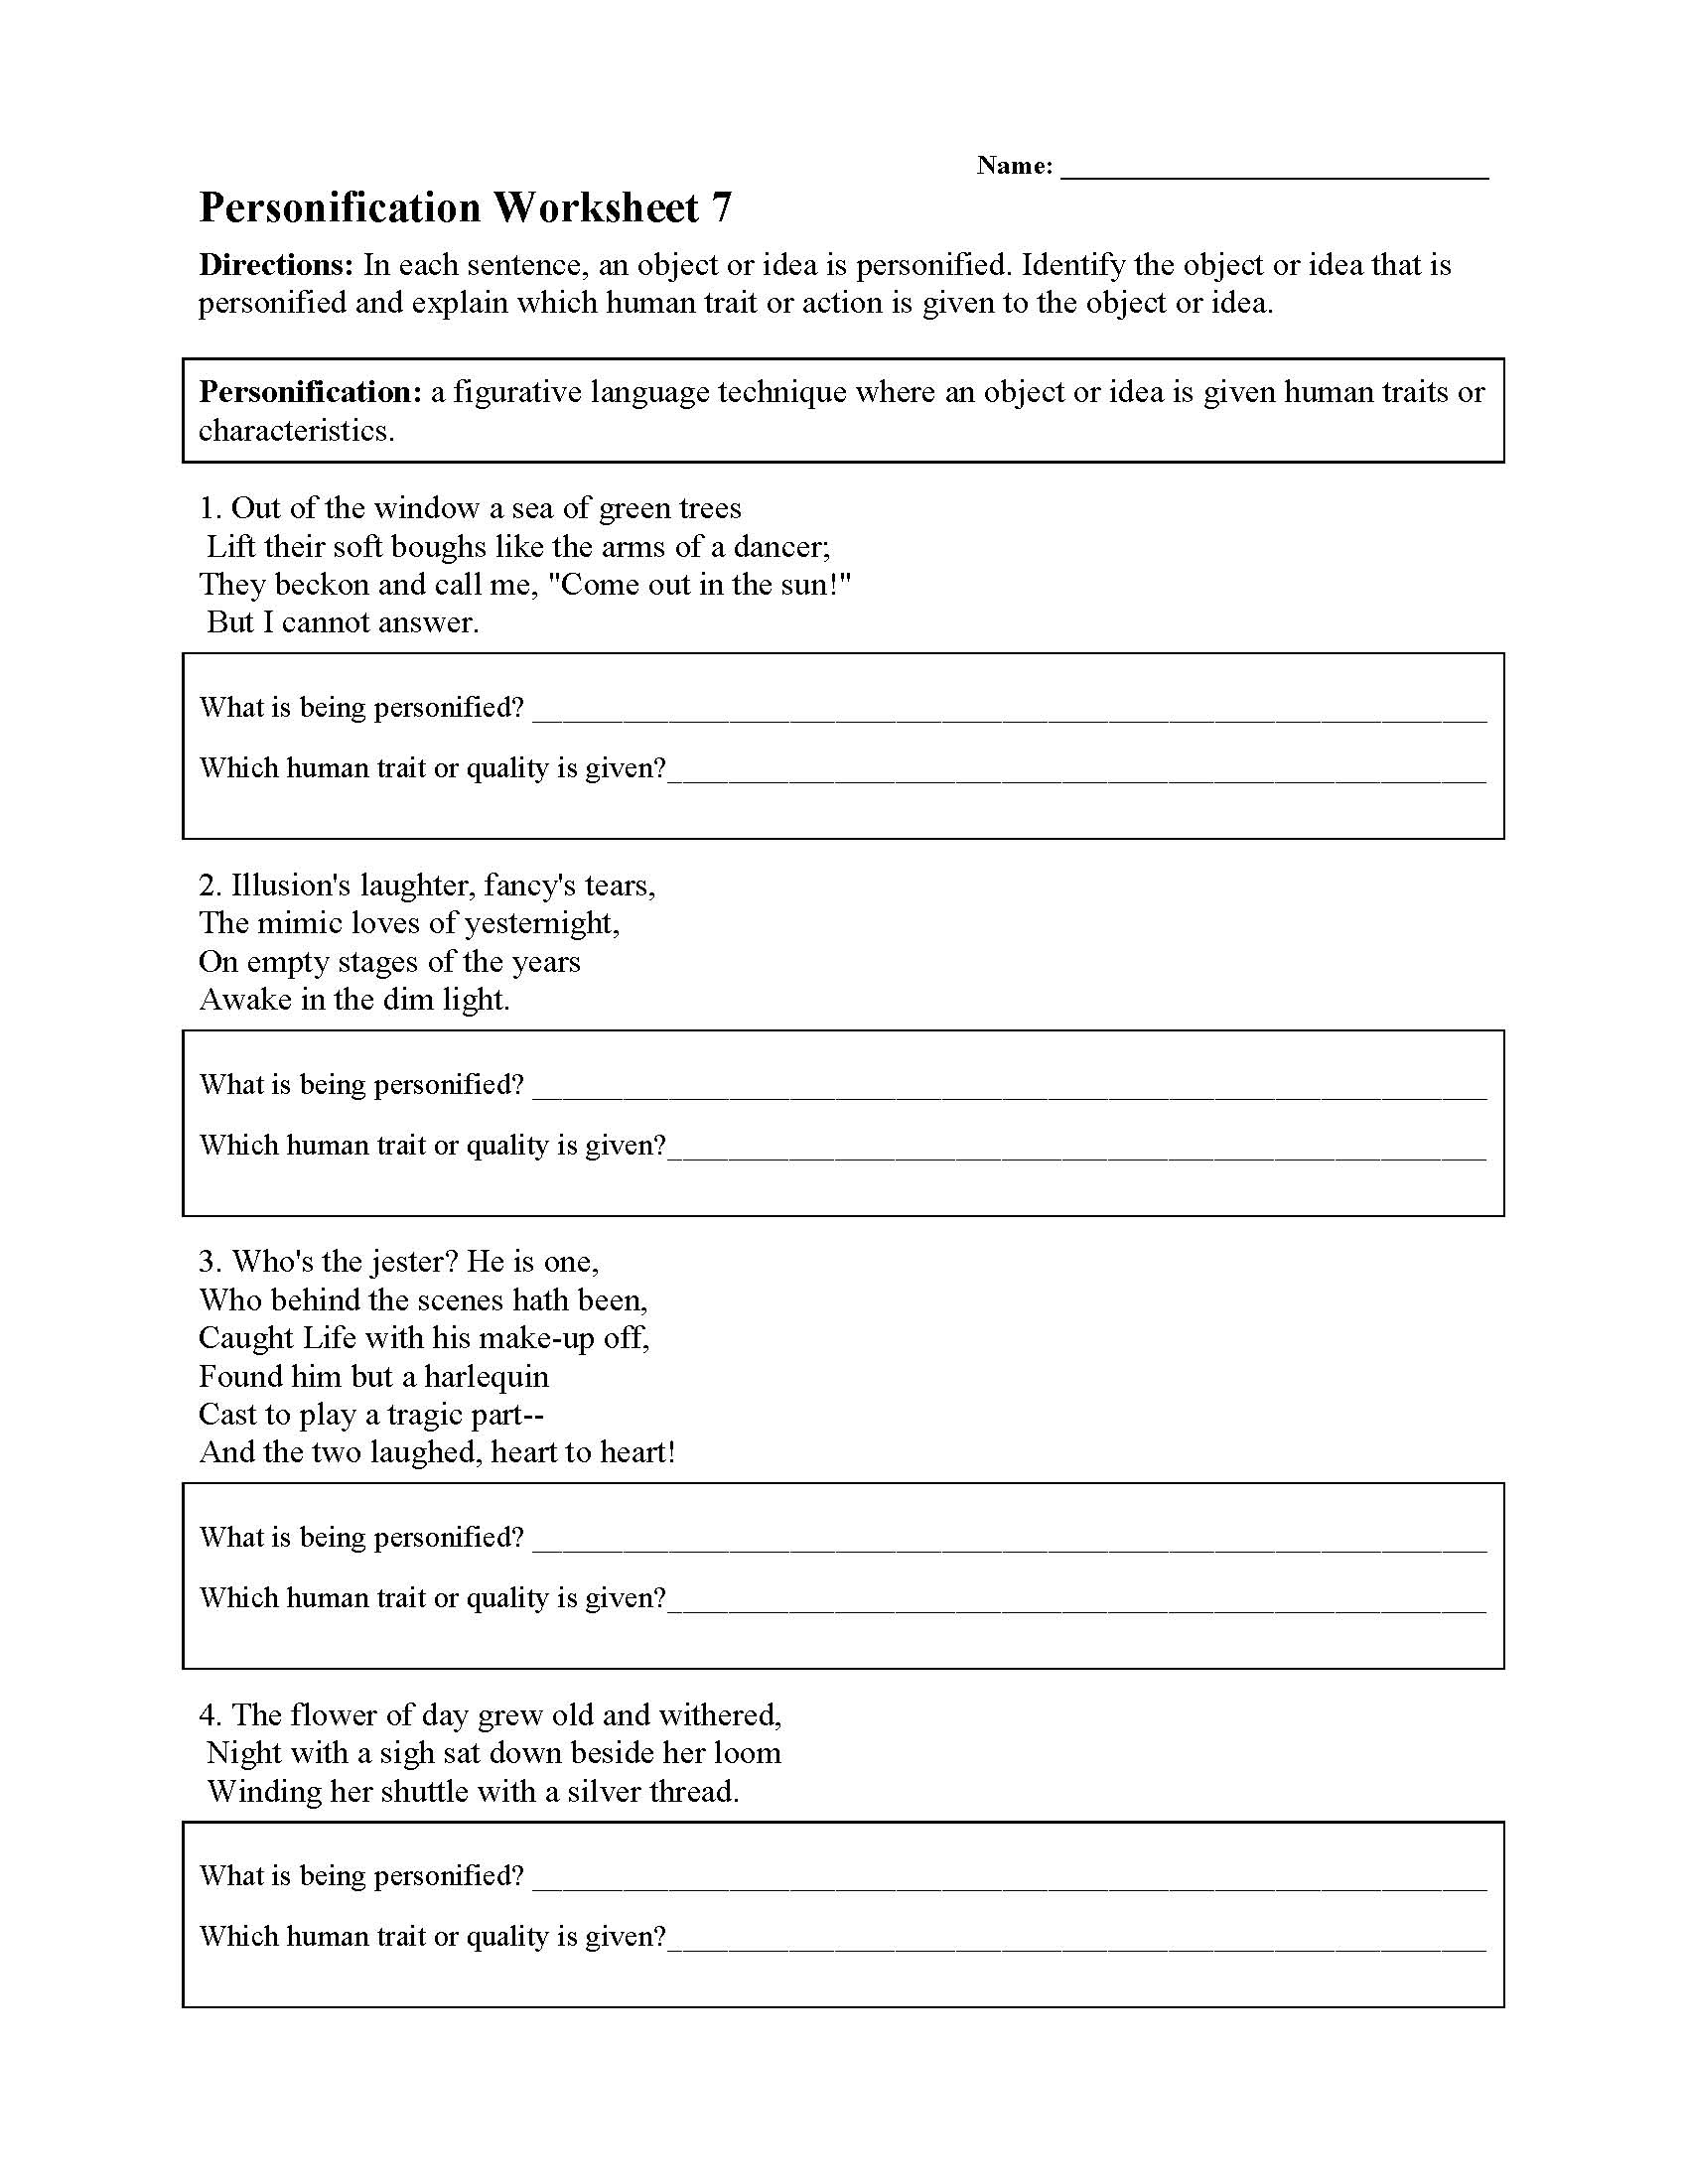 This is a preview image of Personification Worksheet 7. Click on it to enlarge it or view the source file.